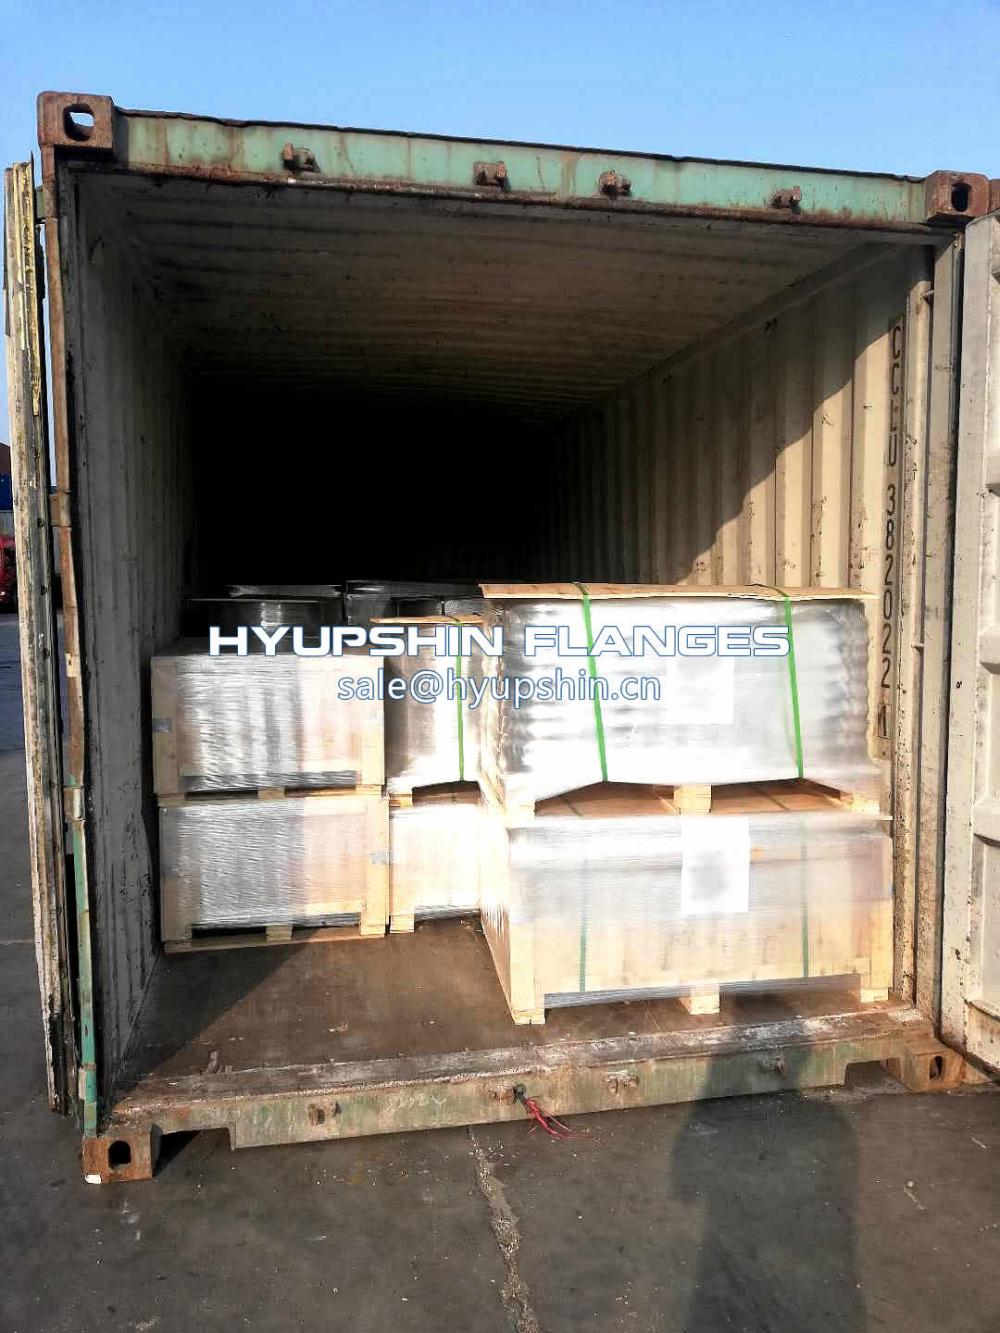 Hyupshin Flanges Export to Bulgaria by Containers